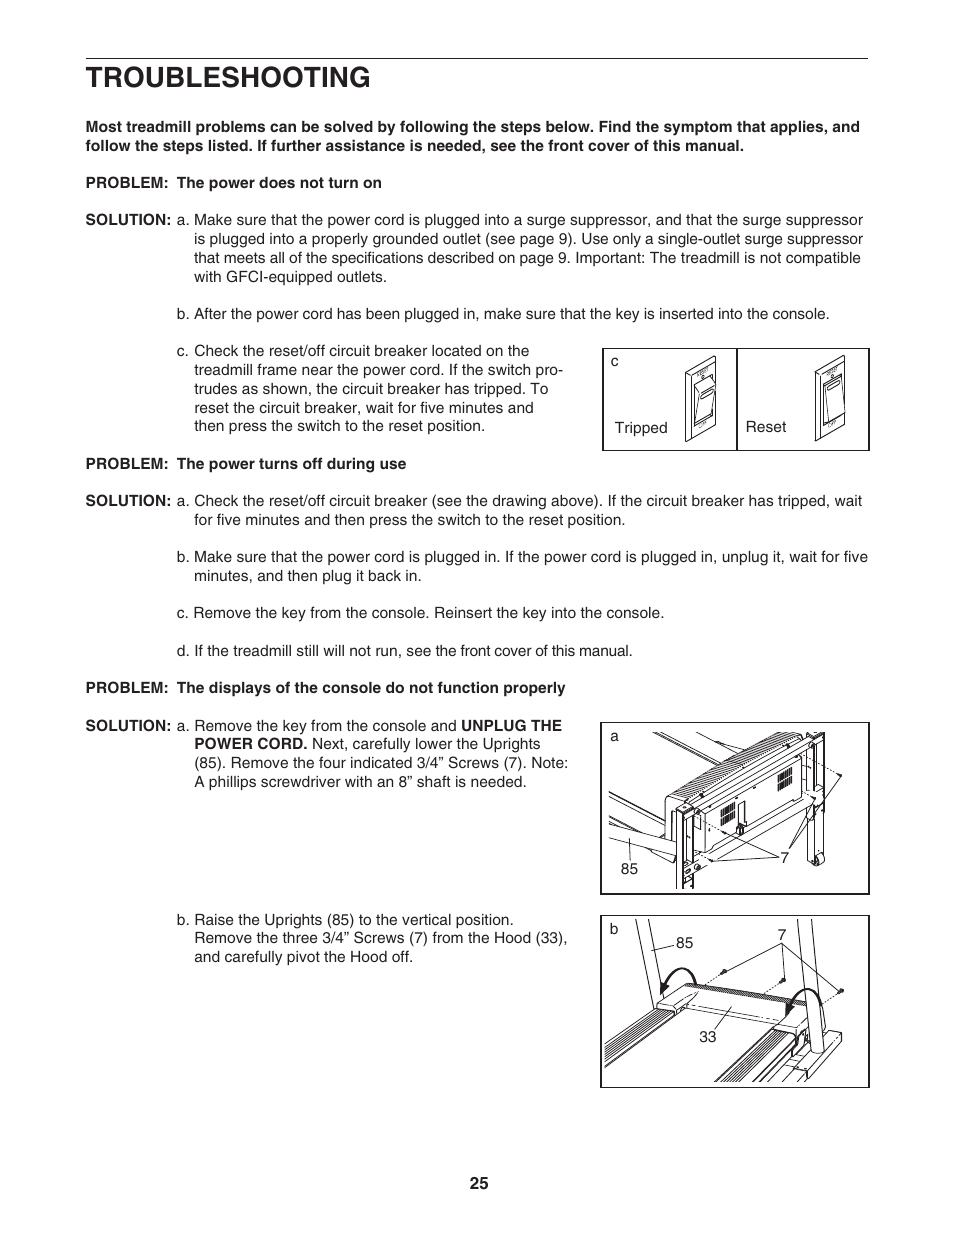 Troubleshooting | NordicTrack C2200 30600.0 User Manual | Page 25 / 34